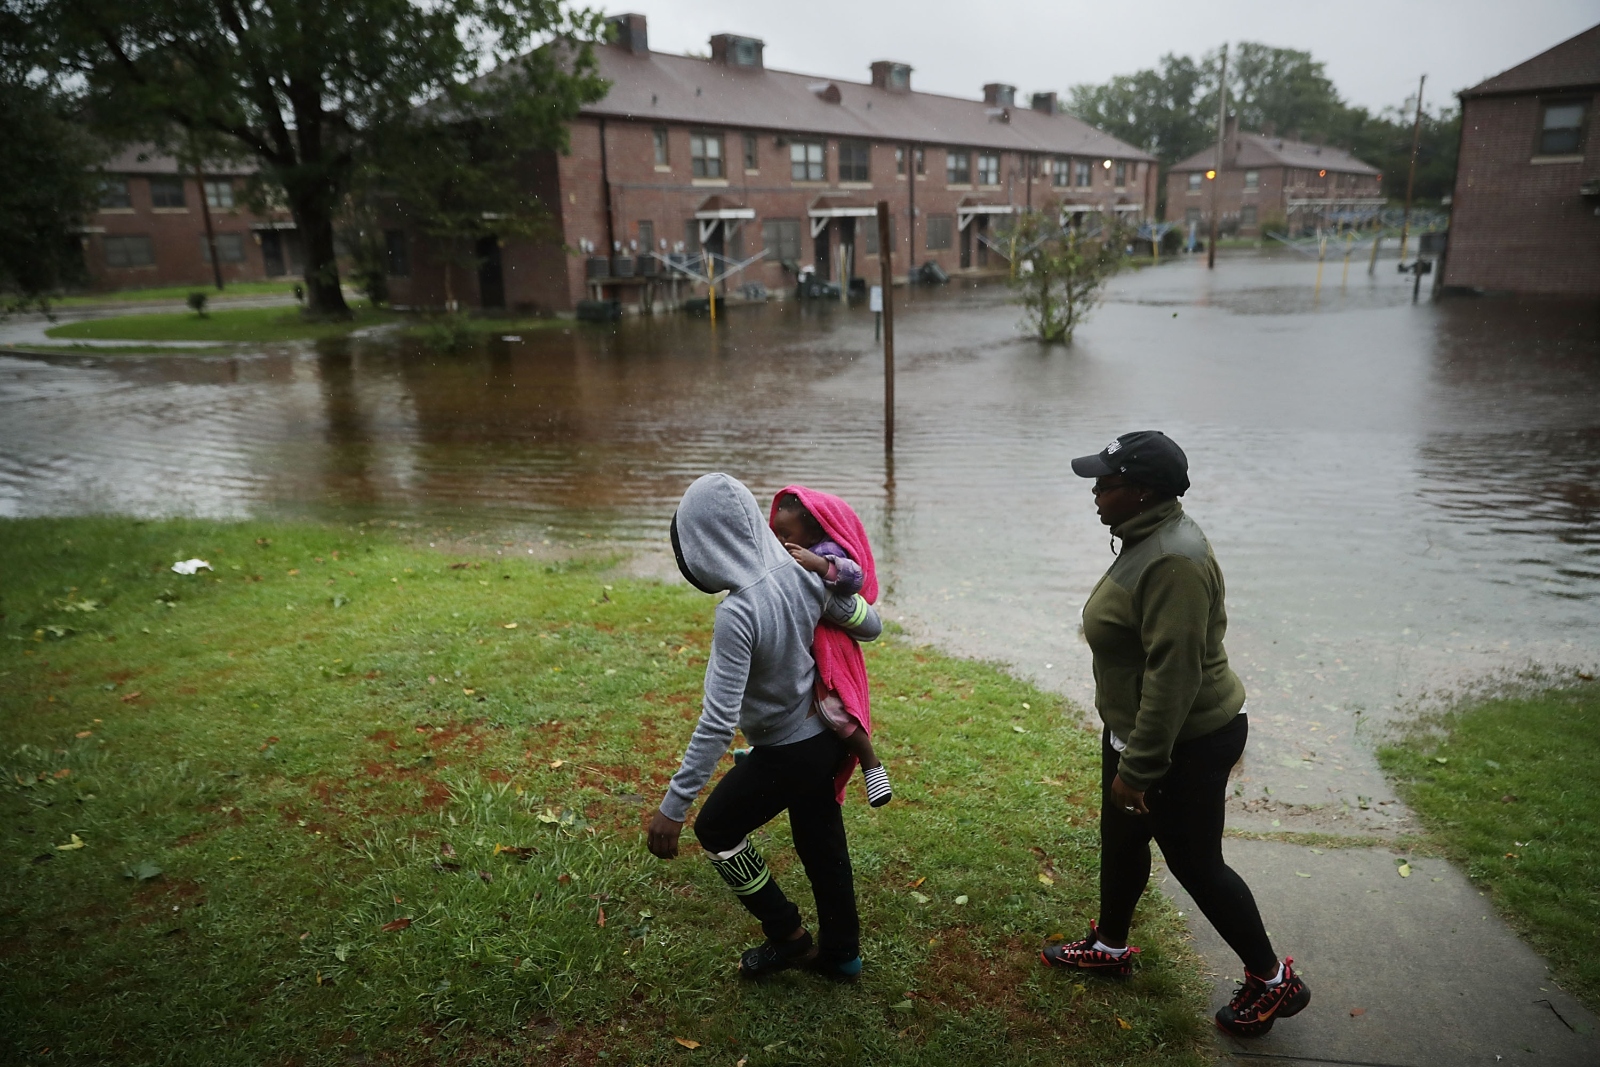 Three people survey the flooding at the Trent Court public housing project in New Bern, North Carolina after Hurricane Florence. A federal program to build new affordable apartments in the city took more than five years to complete.